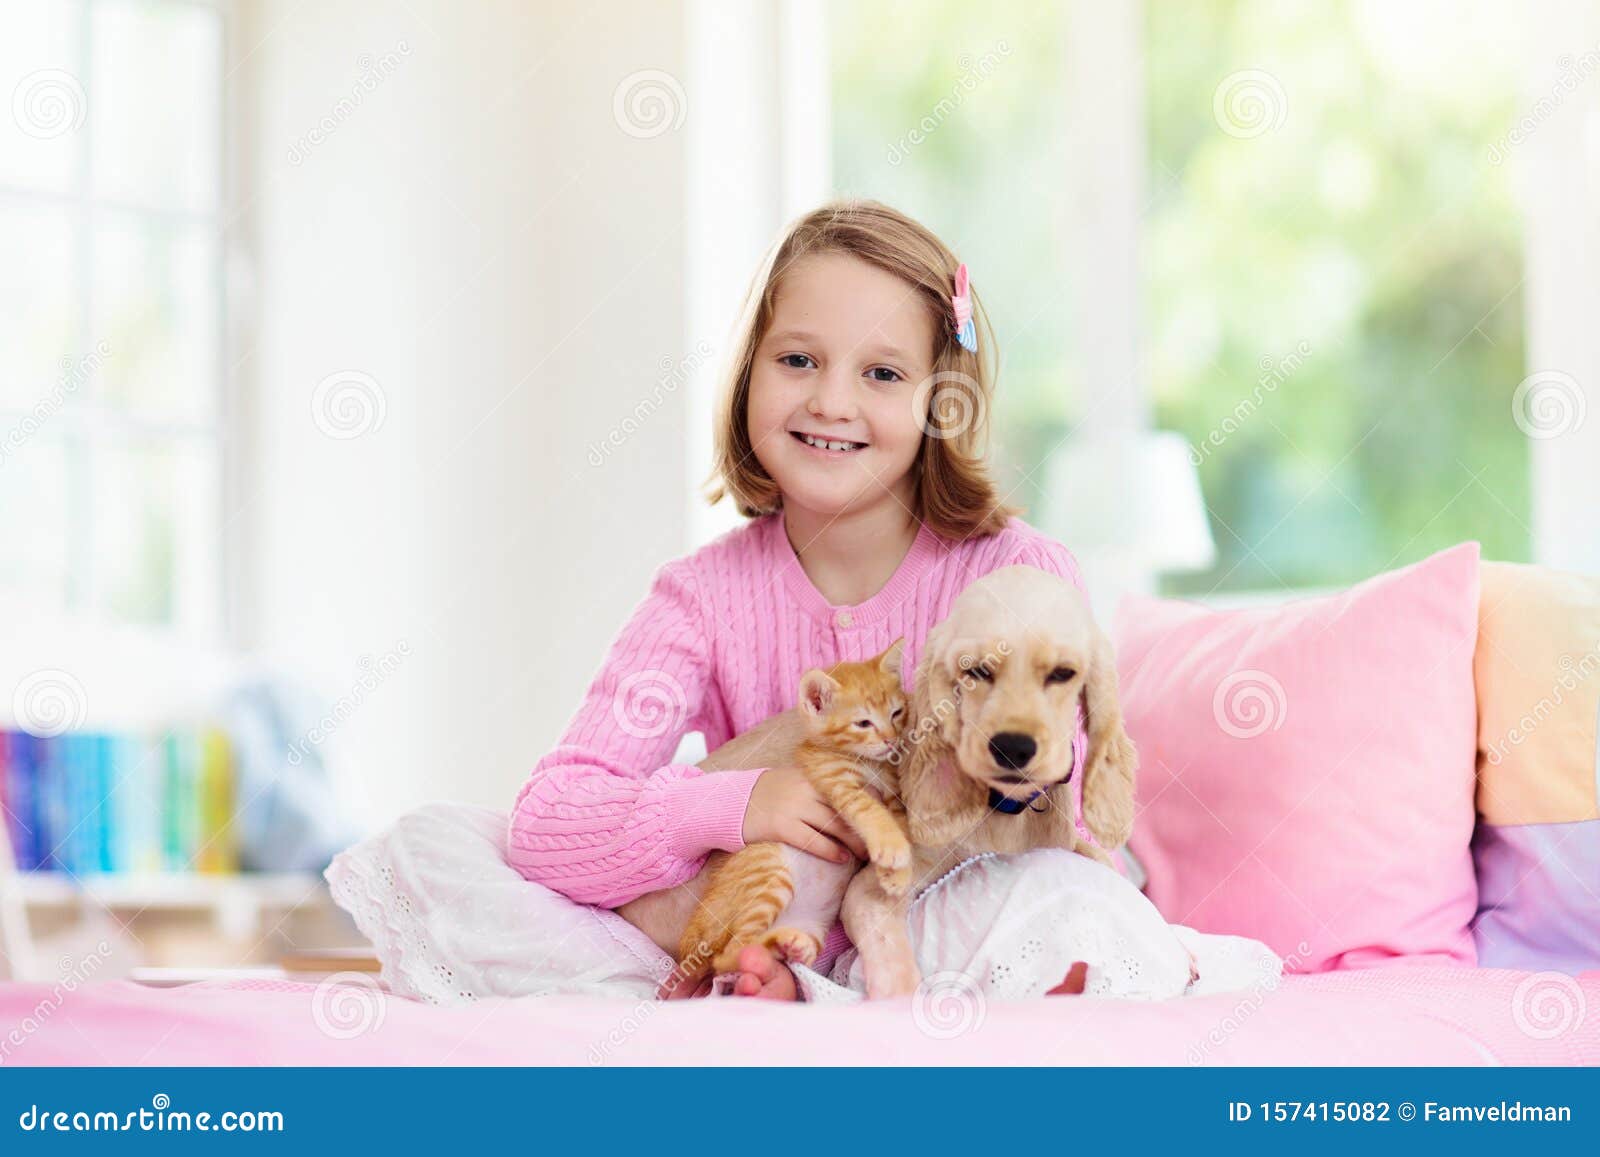 Child, Dog and Cat. Kids Play with Puppy, Kitten Stock Photo - Image of ...